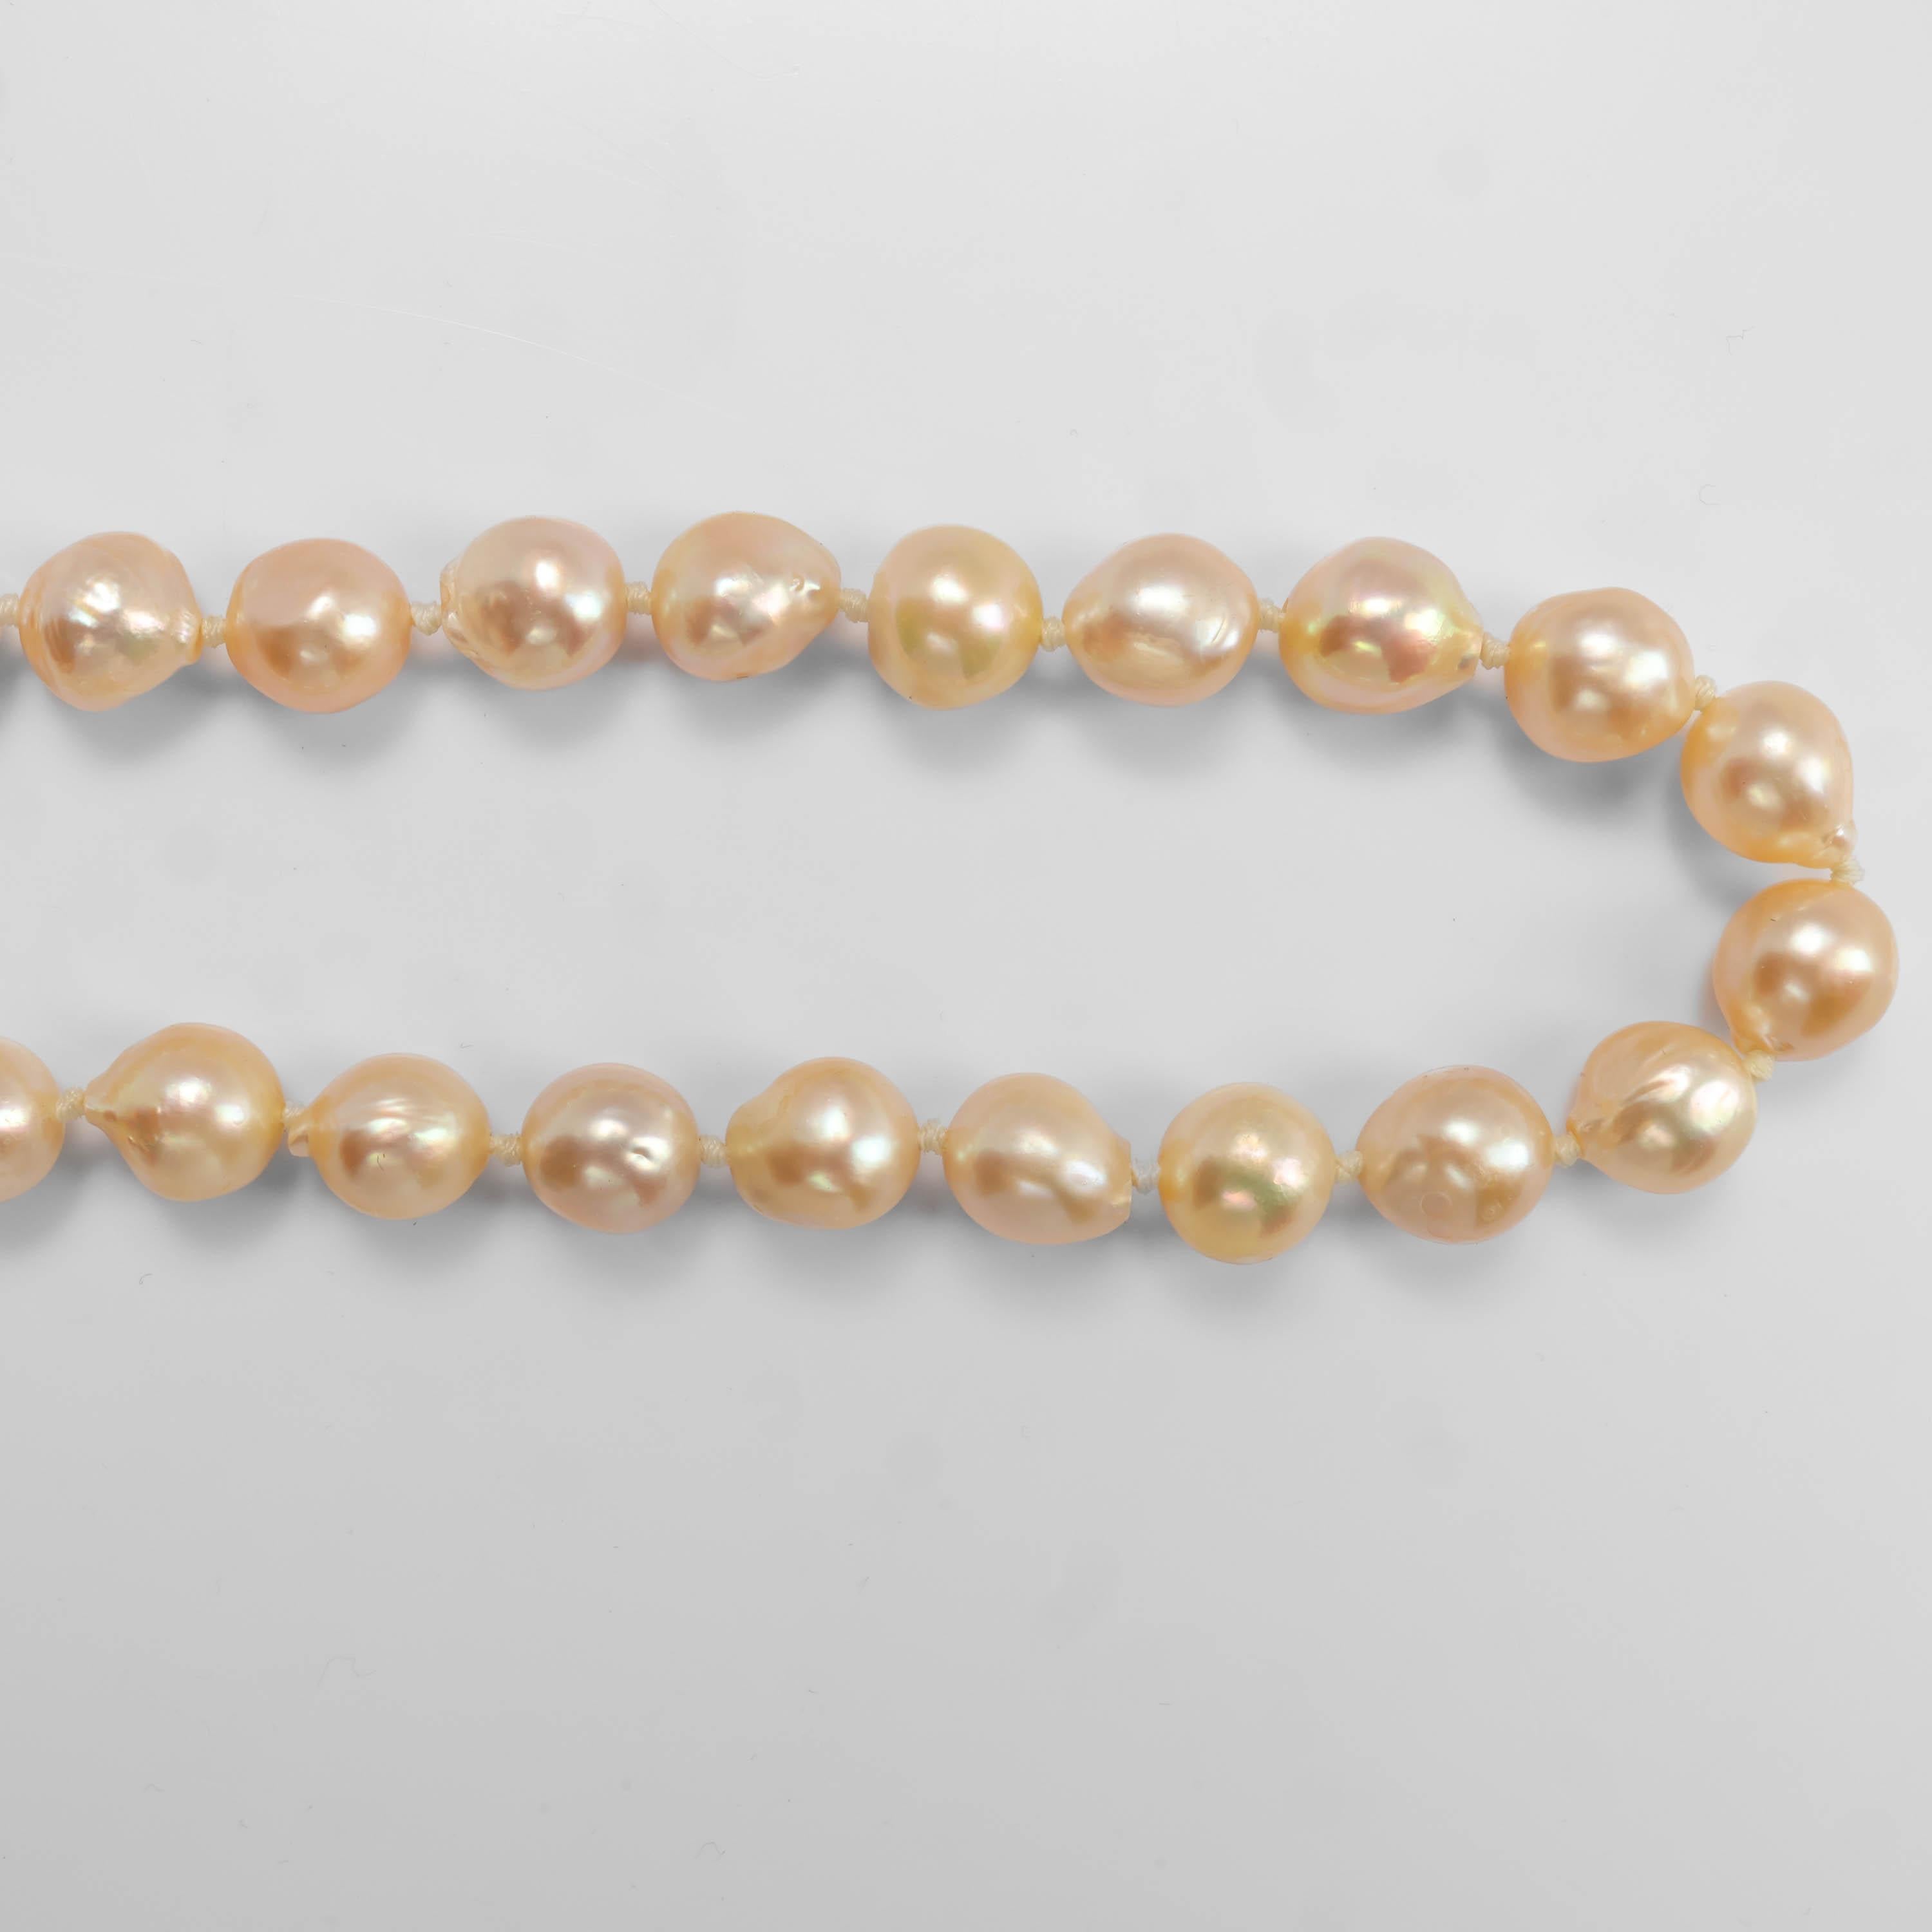 Modern South Sea Pearl Necklace Vers. 1.0